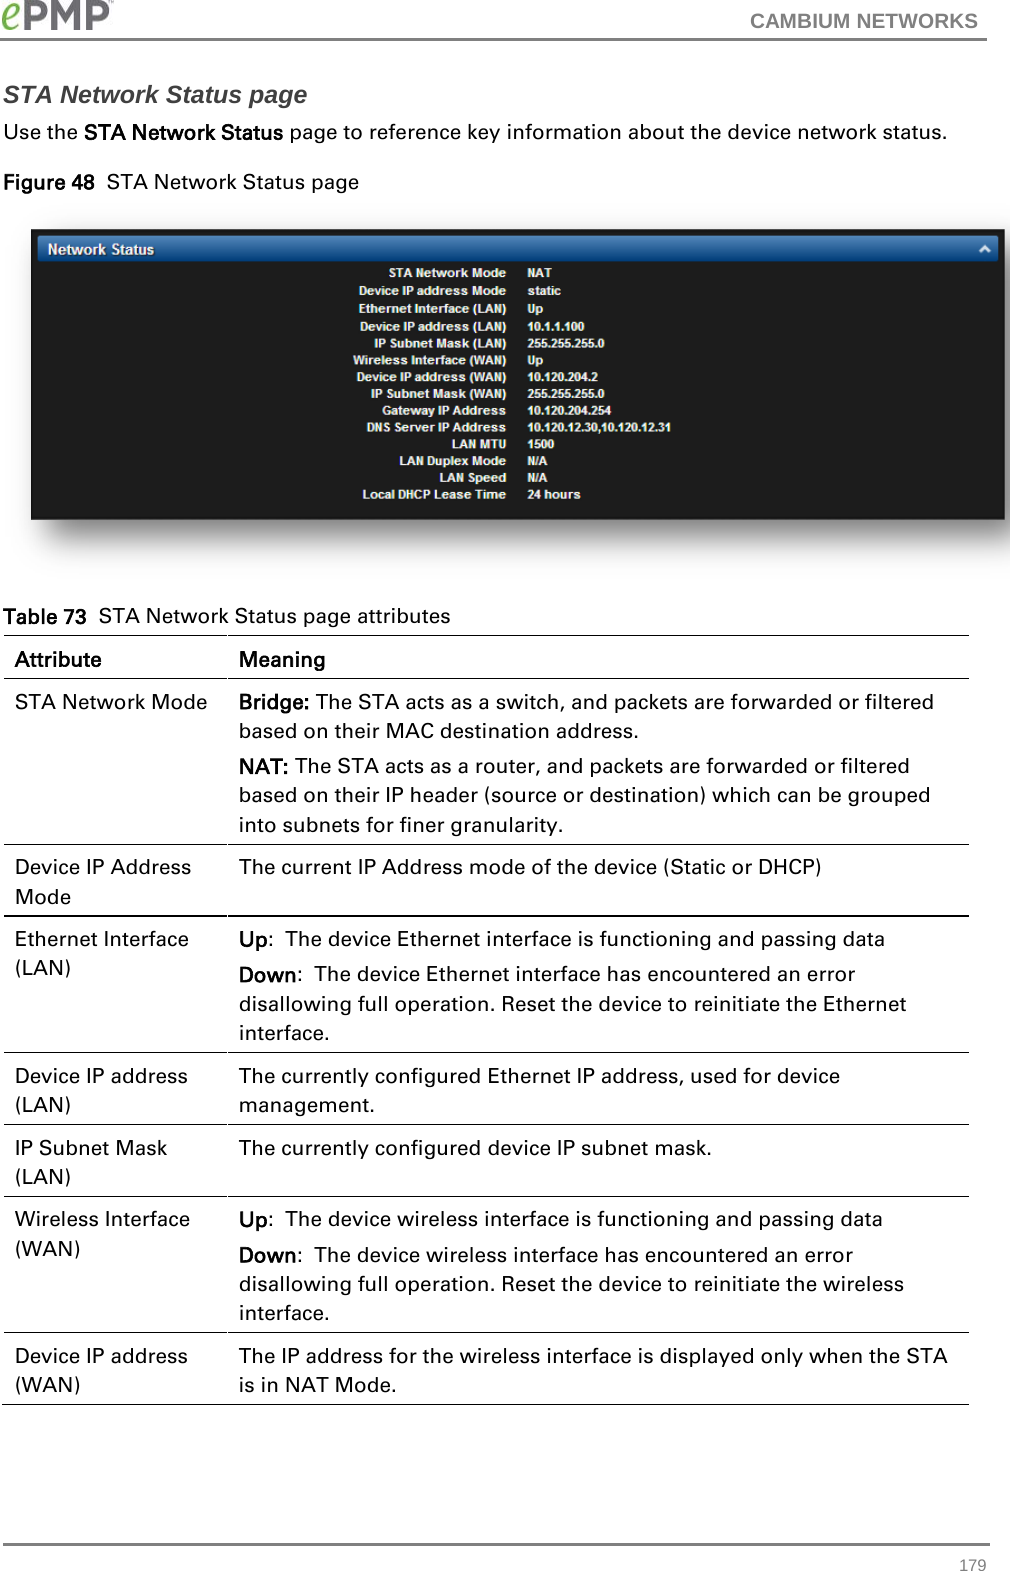 CAMBIUM NETWORKS  STA Network Status page Use the STA Network Status page to reference key information about the device network status. Figure 48  STA Network Status page  Table 73  STA Network Status page attributes Attribute Meaning STA Network Mode Bridge: The STA acts as a switch, and packets are forwarded or filtered based on their MAC destination address. NAT: The STA acts as a router, and packets are forwarded or filtered based on their IP header (source or destination) which can be grouped into subnets for finer granularity. Device IP Address Mode The current IP Address mode of the device (Static or DHCP) Ethernet Interface (LAN) Up:  The device Ethernet interface is functioning and passing data Down:  The device Ethernet interface has encountered an error disallowing full operation. Reset the device to reinitiate the Ethernet interface. Device IP address (LAN) The currently configured Ethernet IP address, used for device management. IP Subnet Mask (LAN) The currently configured device IP subnet mask. Wireless Interface (WAN) Up:  The device wireless interface is functioning and passing data Down:  The device wireless interface has encountered an error disallowing full operation. Reset the device to reinitiate the wireless interface. Device IP address (WAN) The IP address for the wireless interface is displayed only when the STA is in NAT Mode.  179 